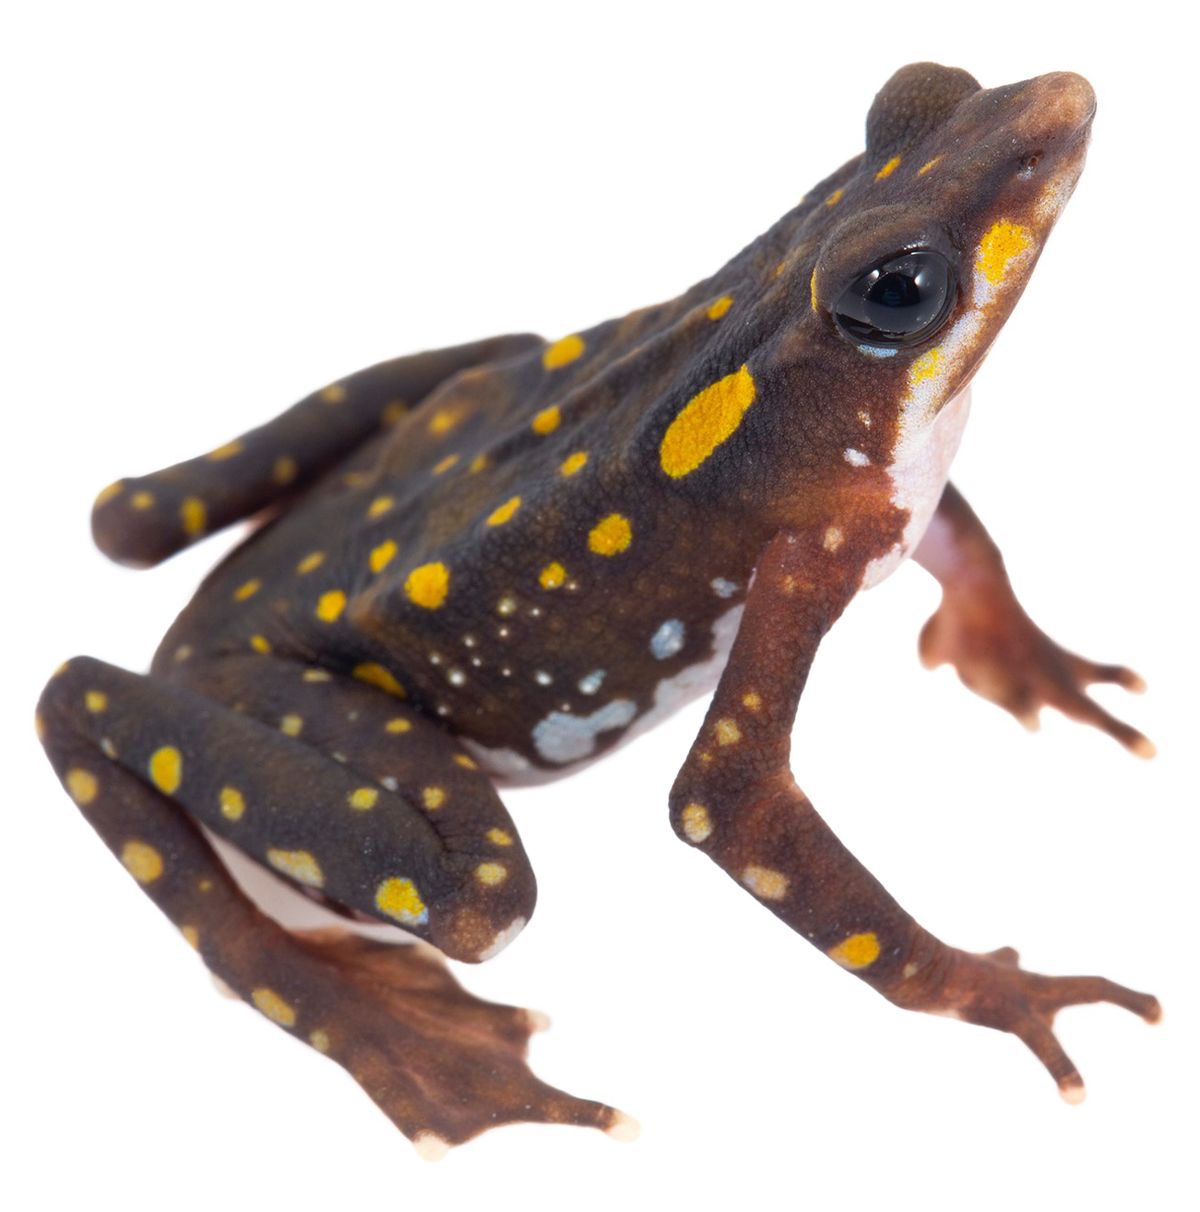 A breeding program that started with two males and two females of Ecuador’s longnose harlequin toad (<em>Atelopus longirostris</em>), once thought extinct, now has dozens of adults and hundreds of juveniles and tadpoles.